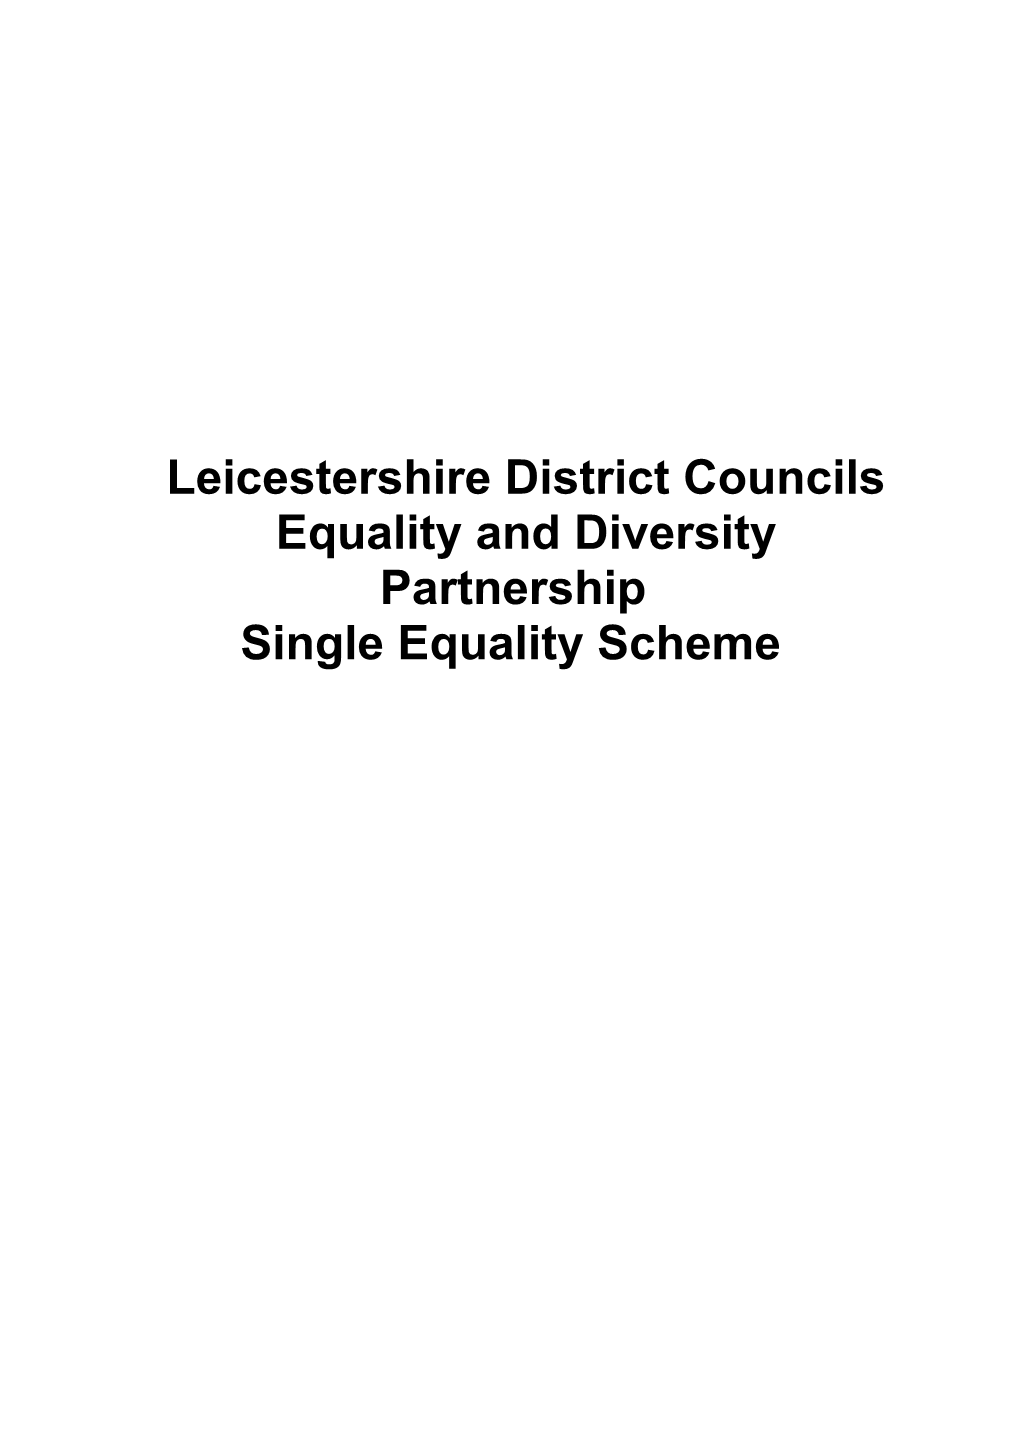 Leicestershire District Council Single Equality and Diversity Scheme